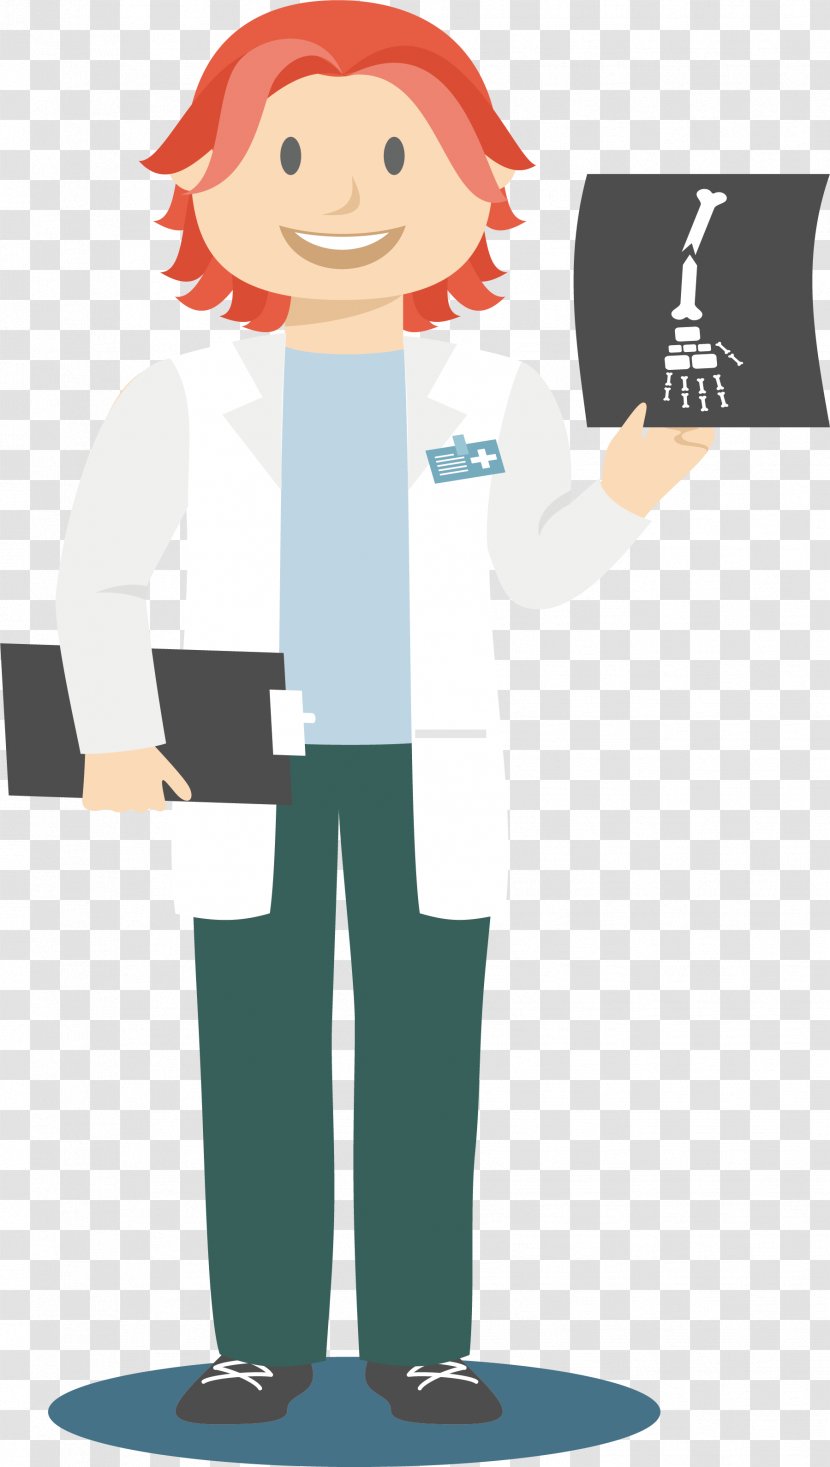 Orthopedic Surgery Physician Clip Art - Happiness - Department Of Orthopedics Doctor Transparent PNG